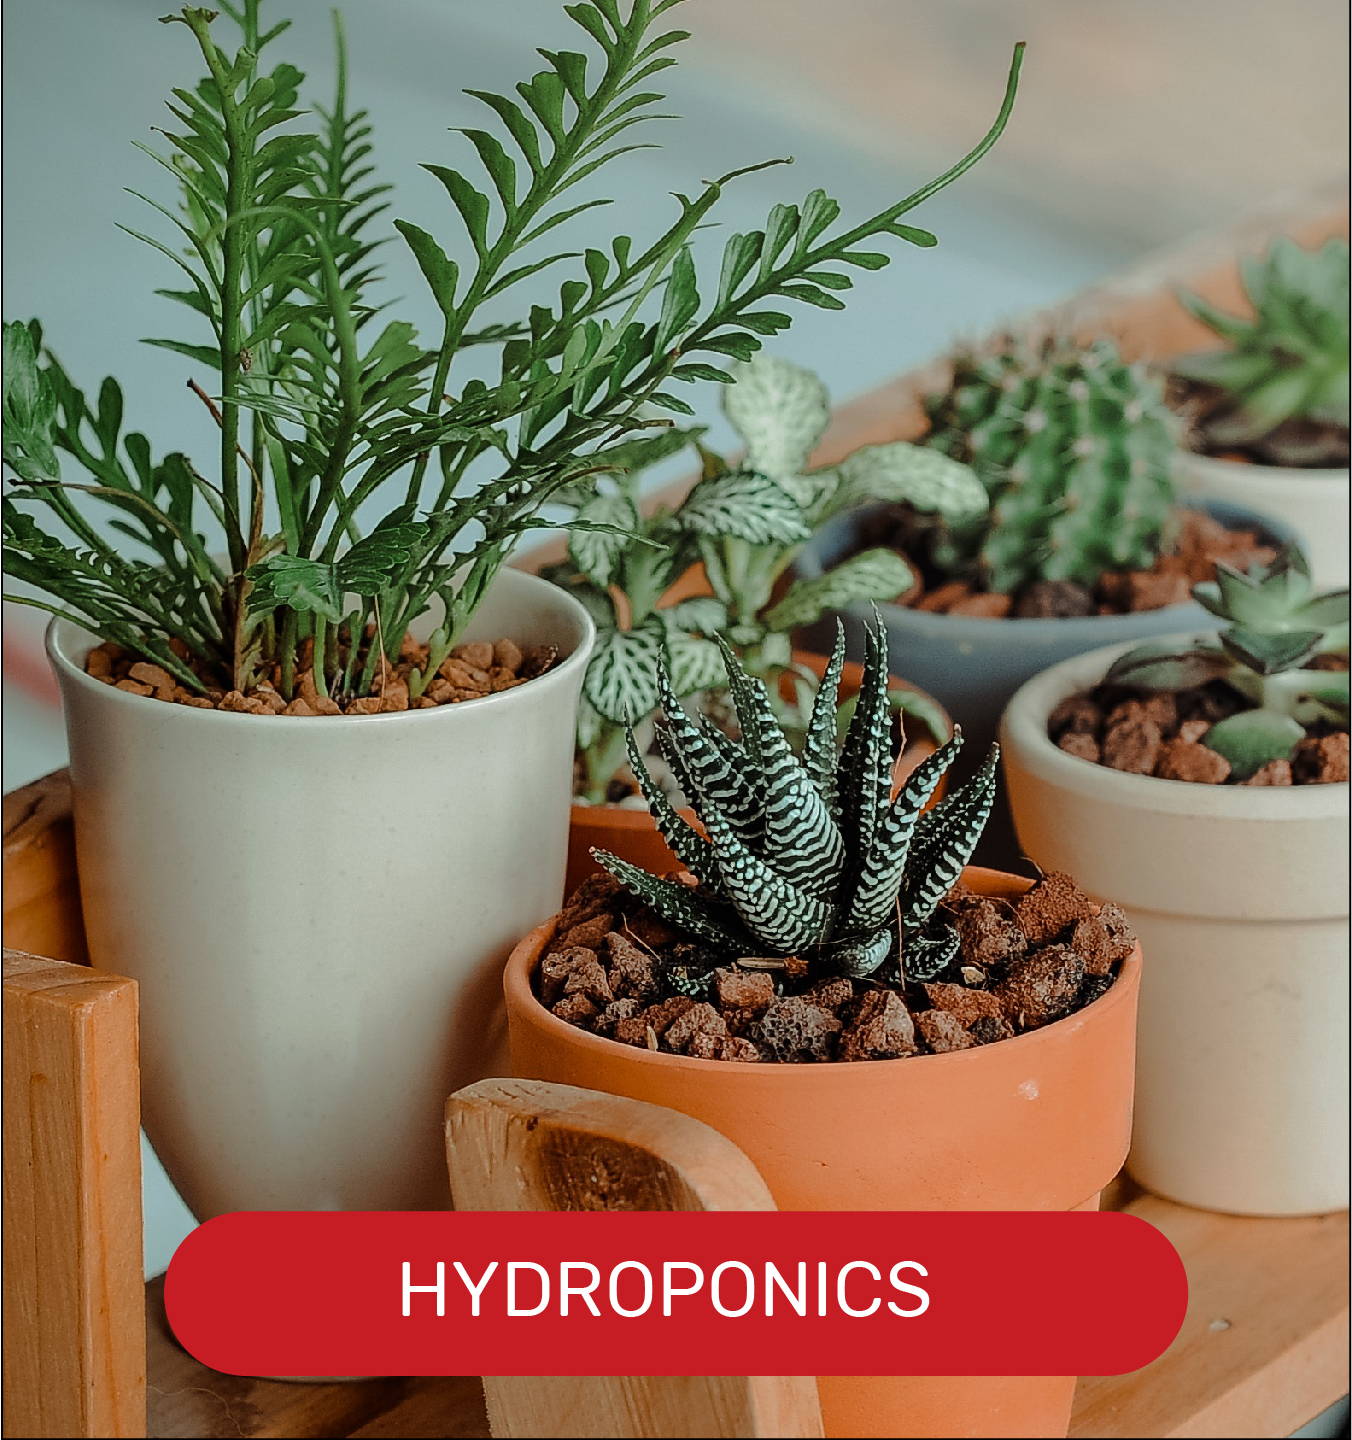 Hydroponics water filtration systems